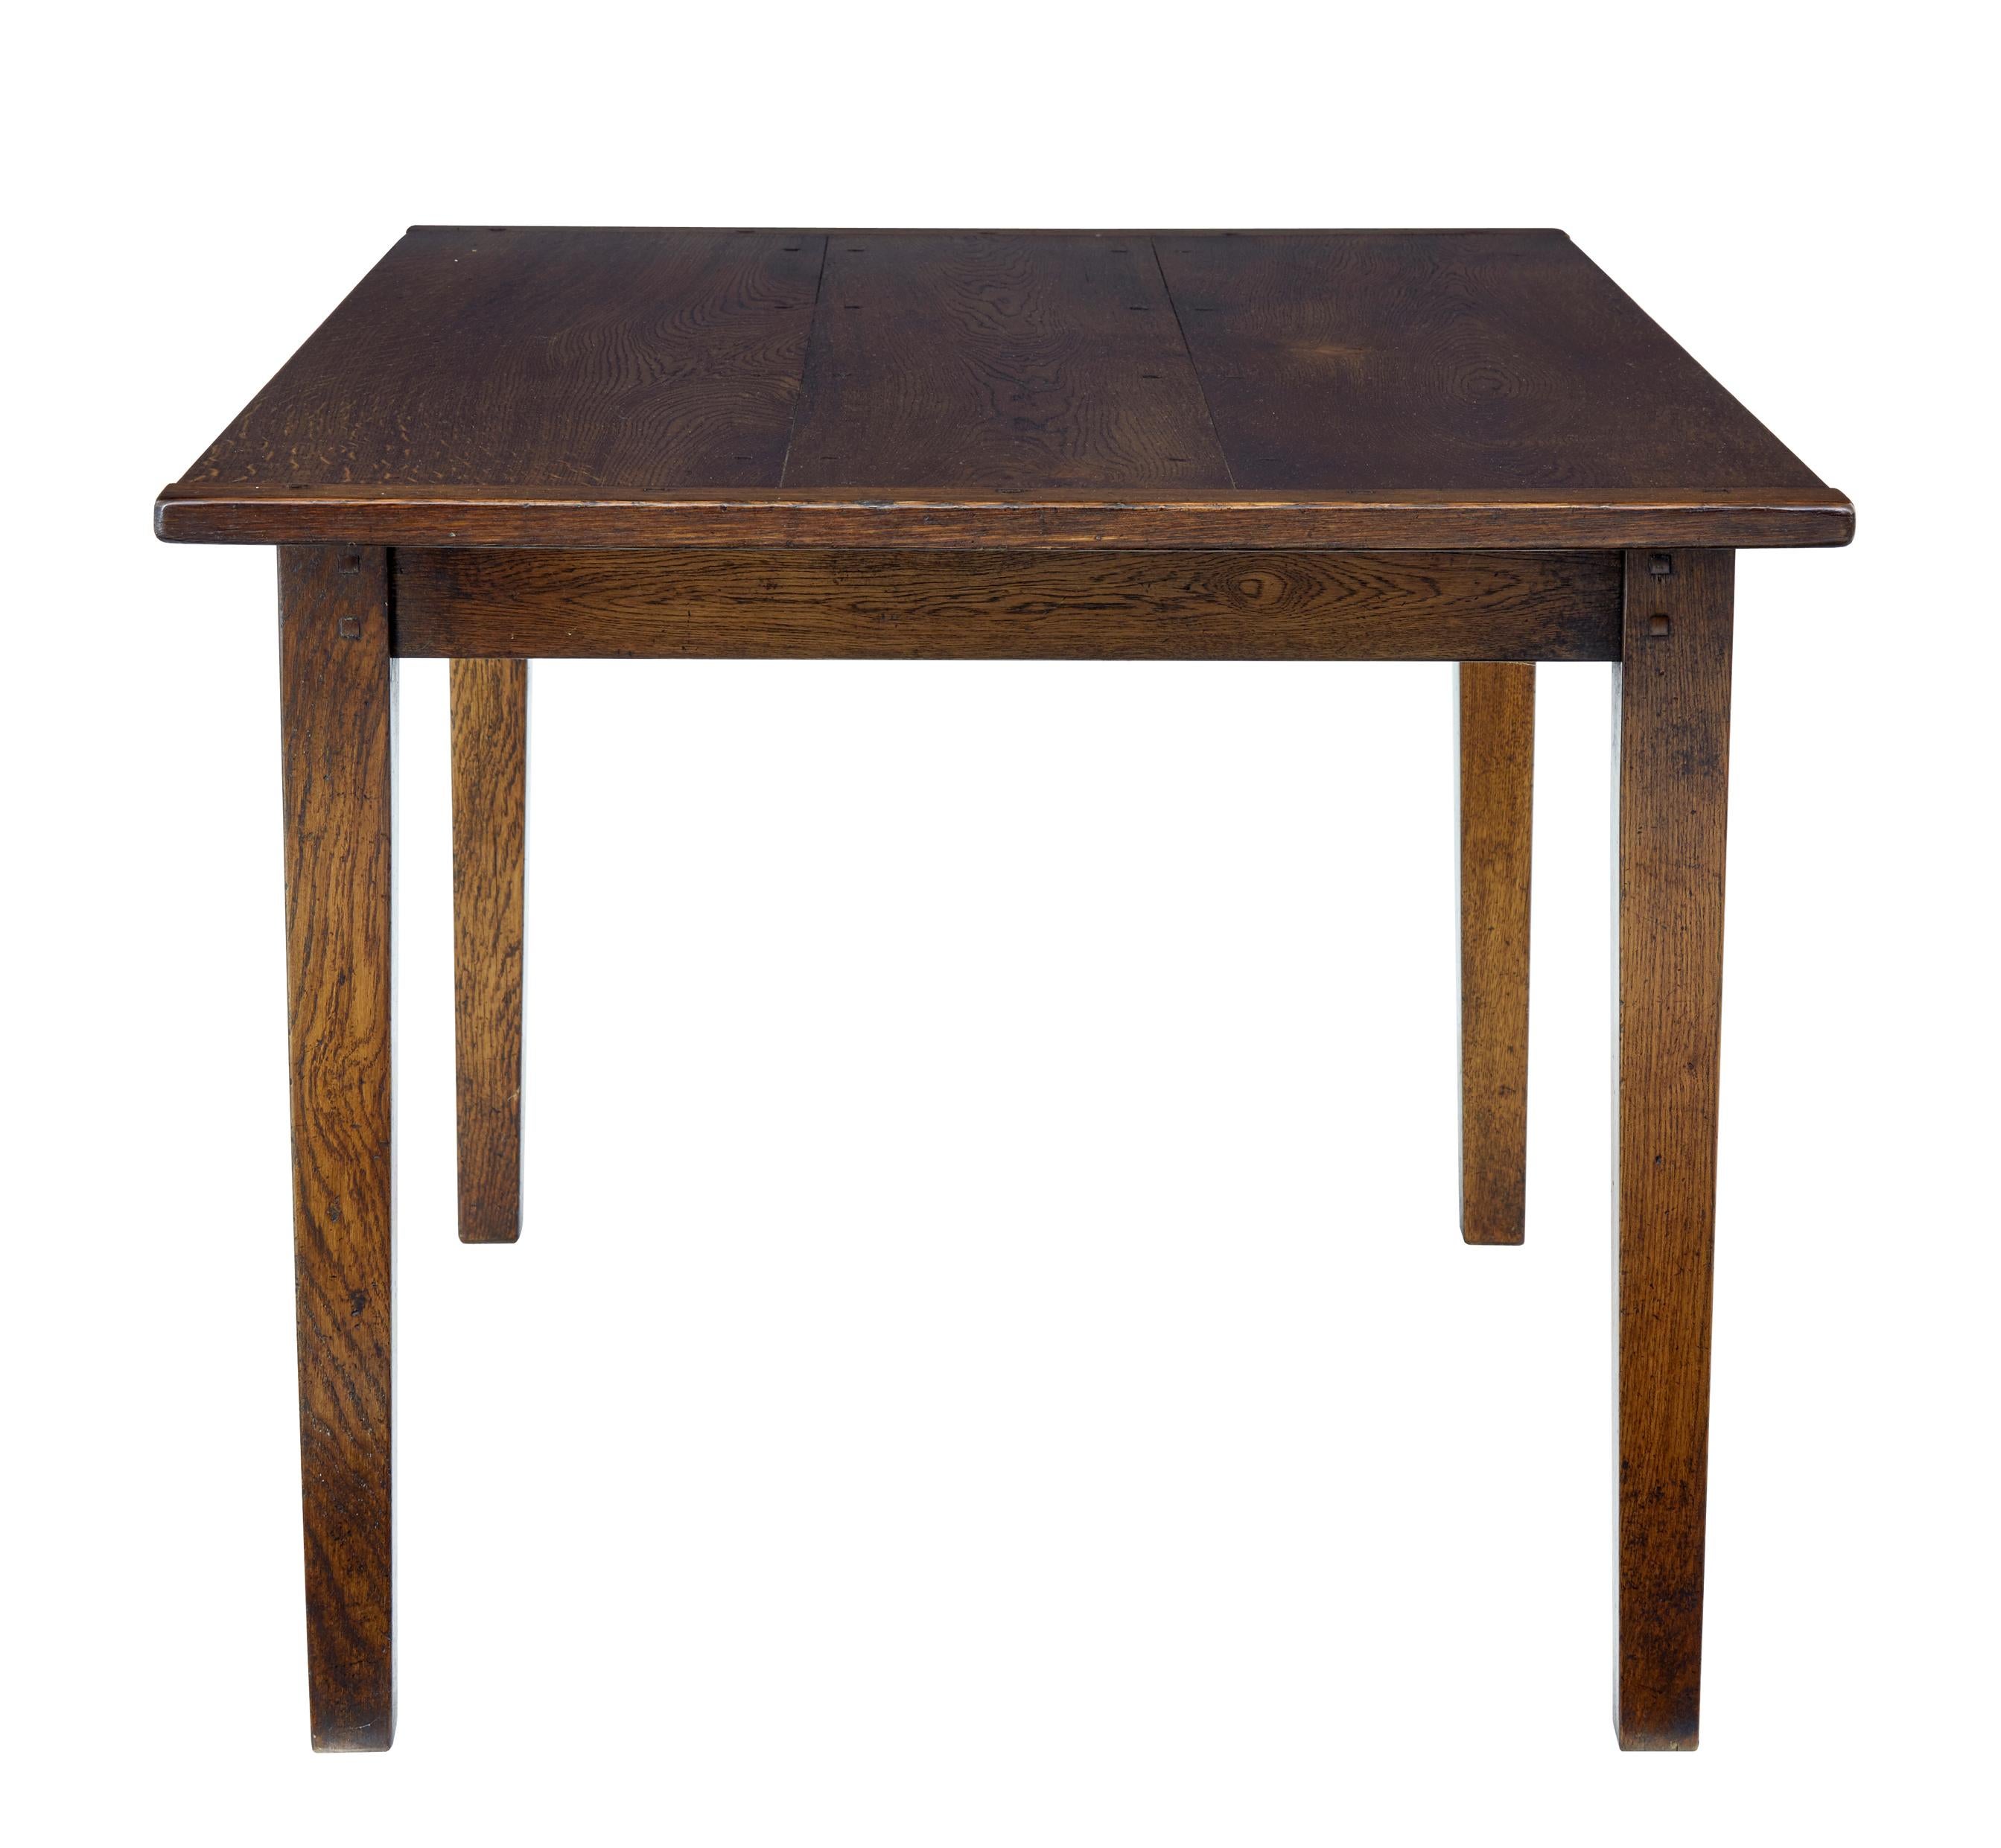 Good quality English made solid oak dining table.

Farmhouse inspired with a 3 plank top and cleated ends. Standing on slightly tapering legs.

Slight shrinkage to cleated ends which are photographed.

Seats a comfortable 6.

Apron height: